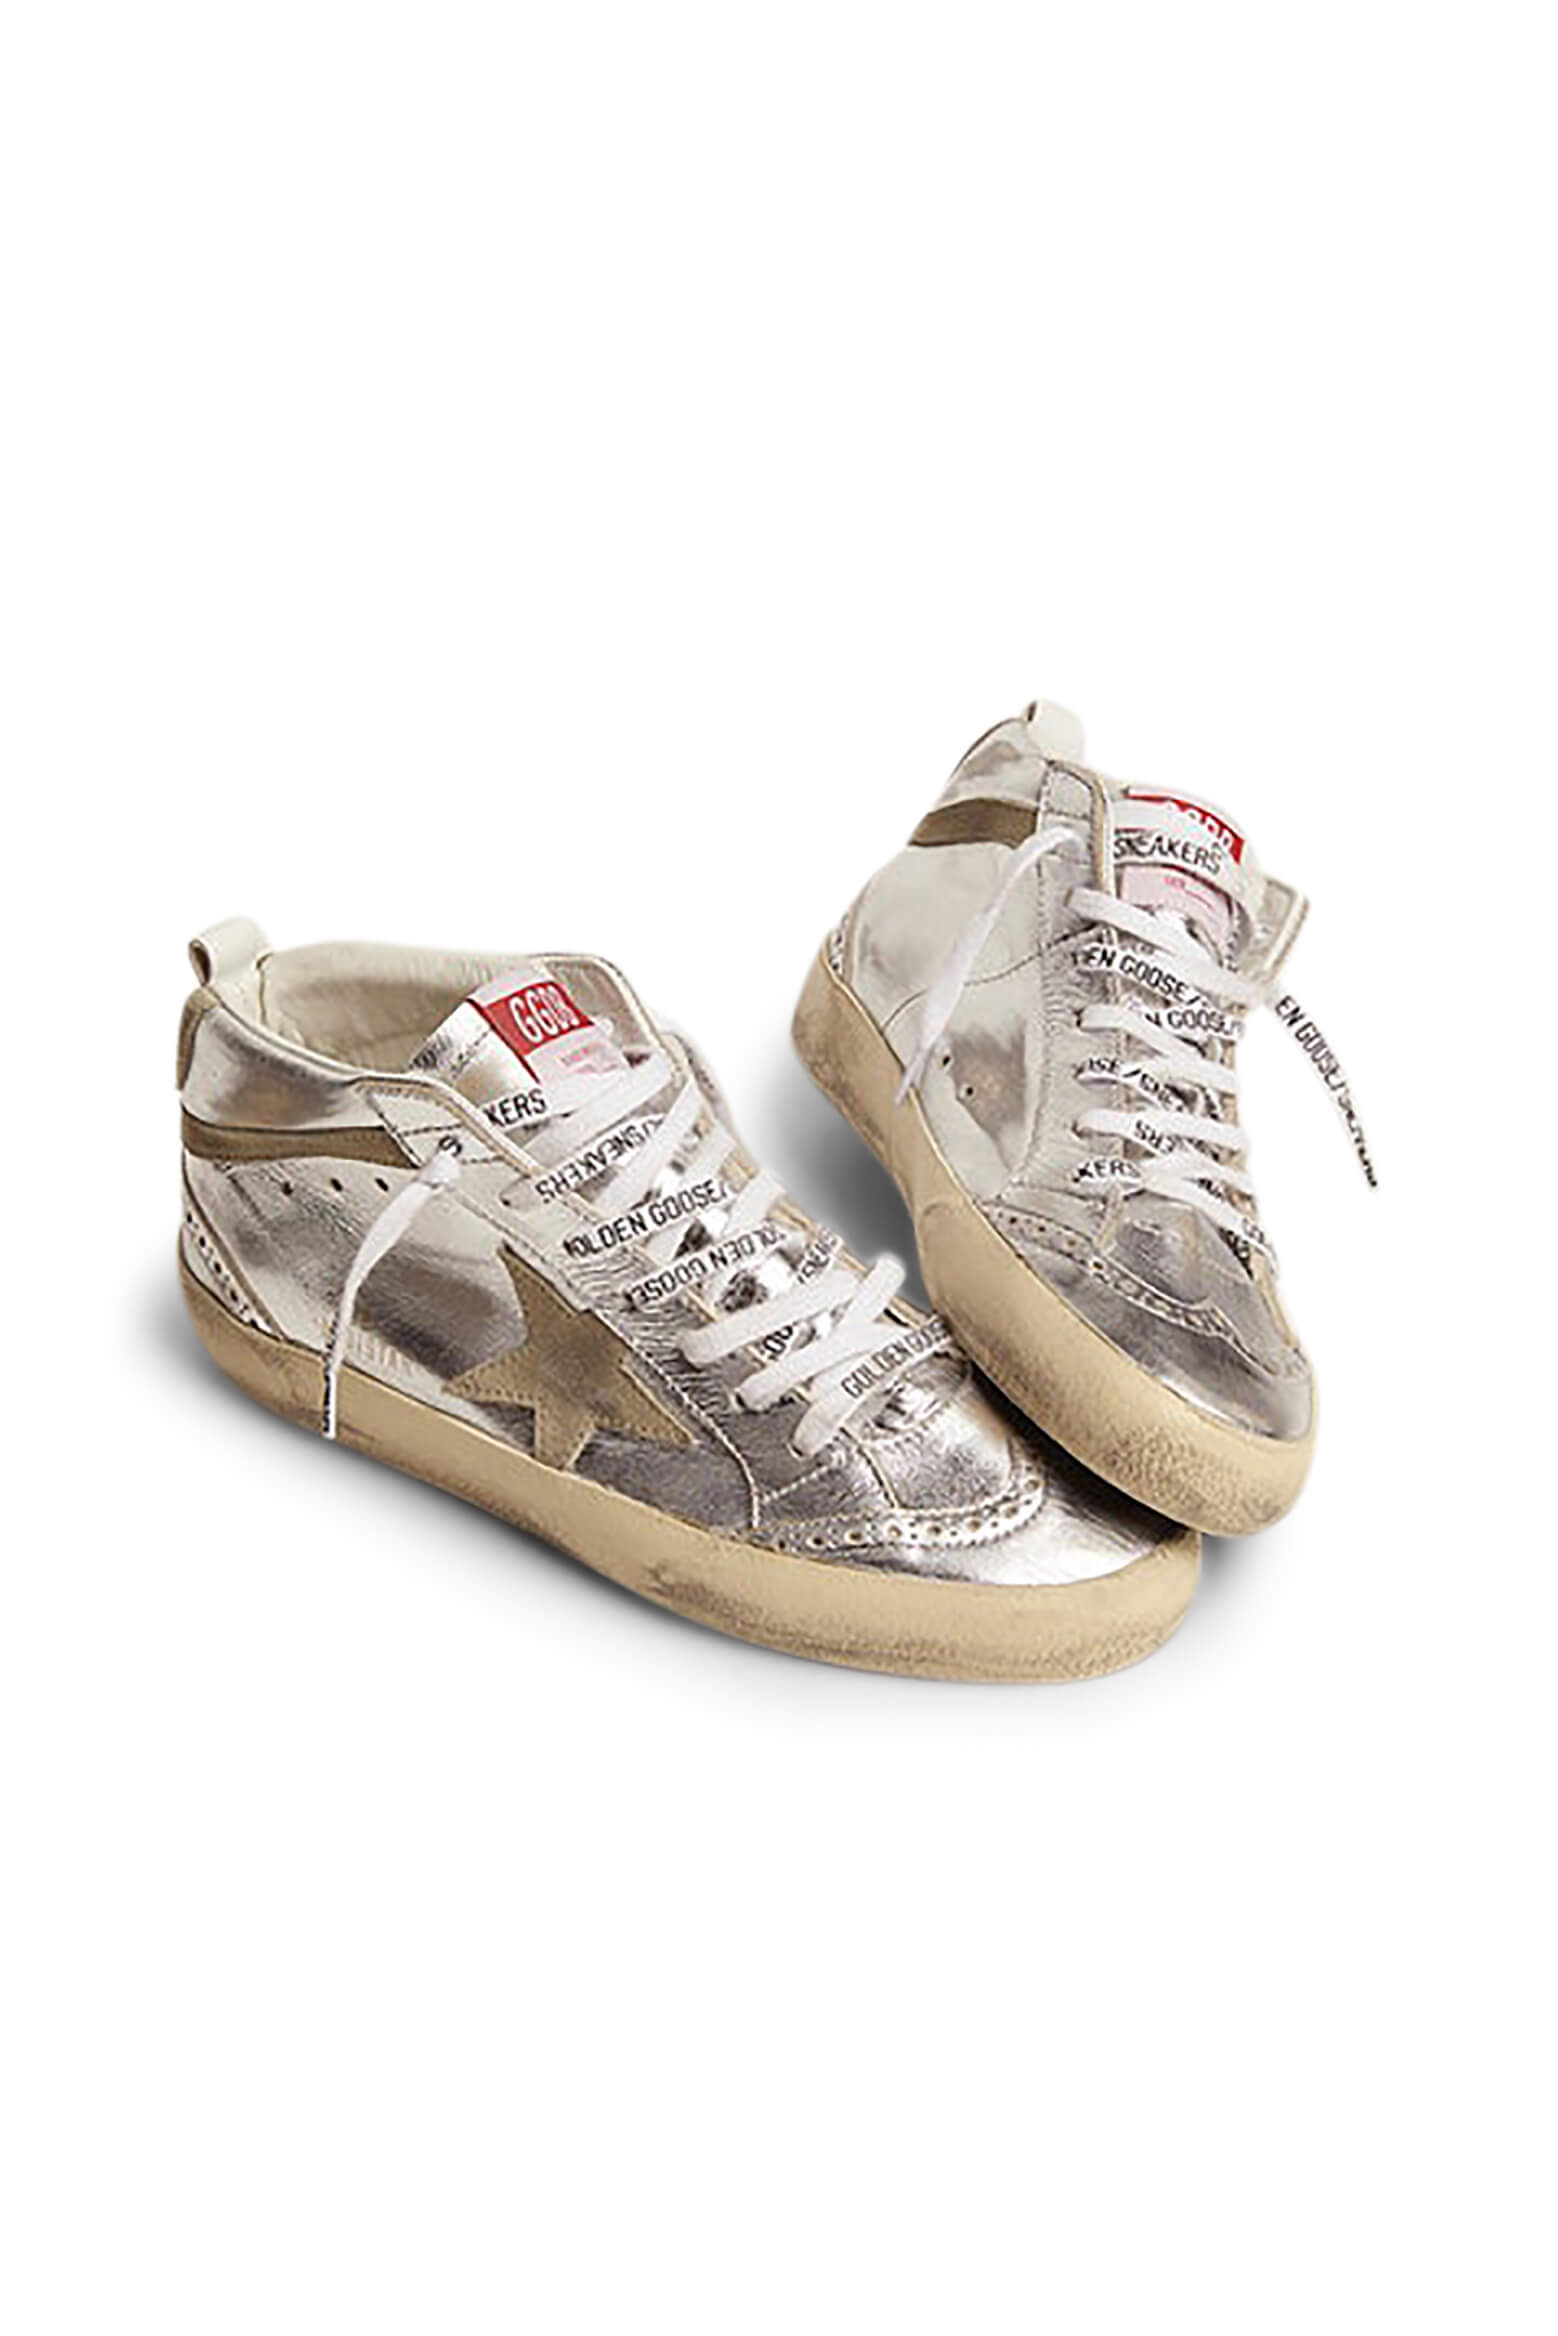 Golden Goose Mid Star Sneakers in Silver and Taupe from The New Trend